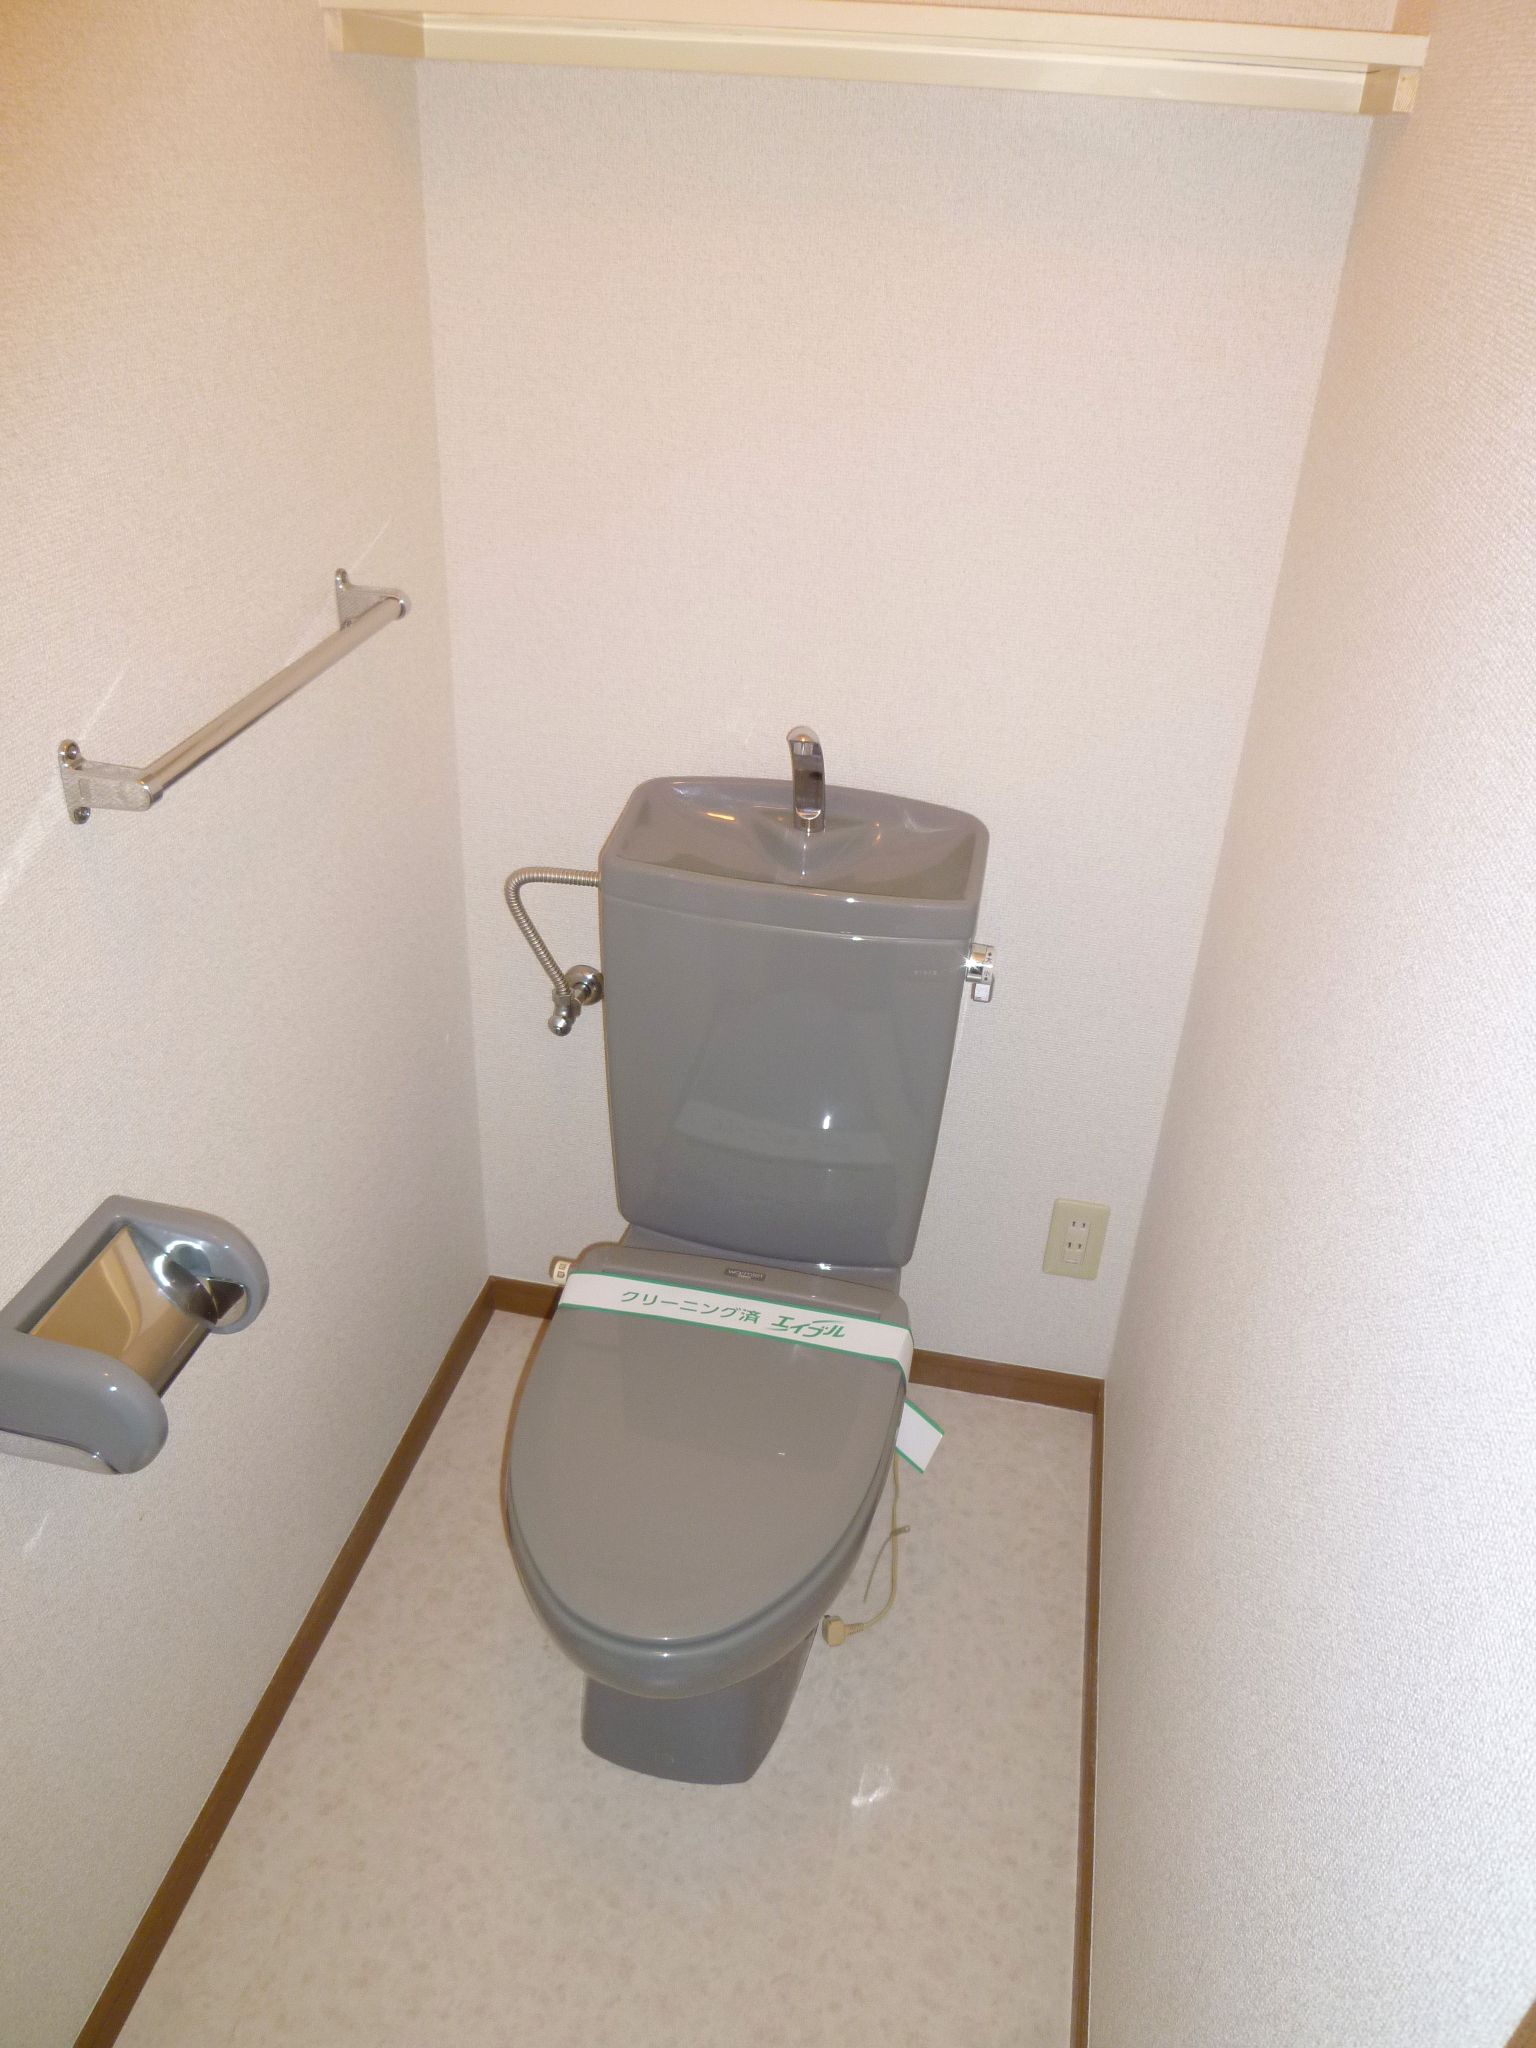 Toilet. A heated toilet seat (because there is an electrical outlet bidet bring Allowed)